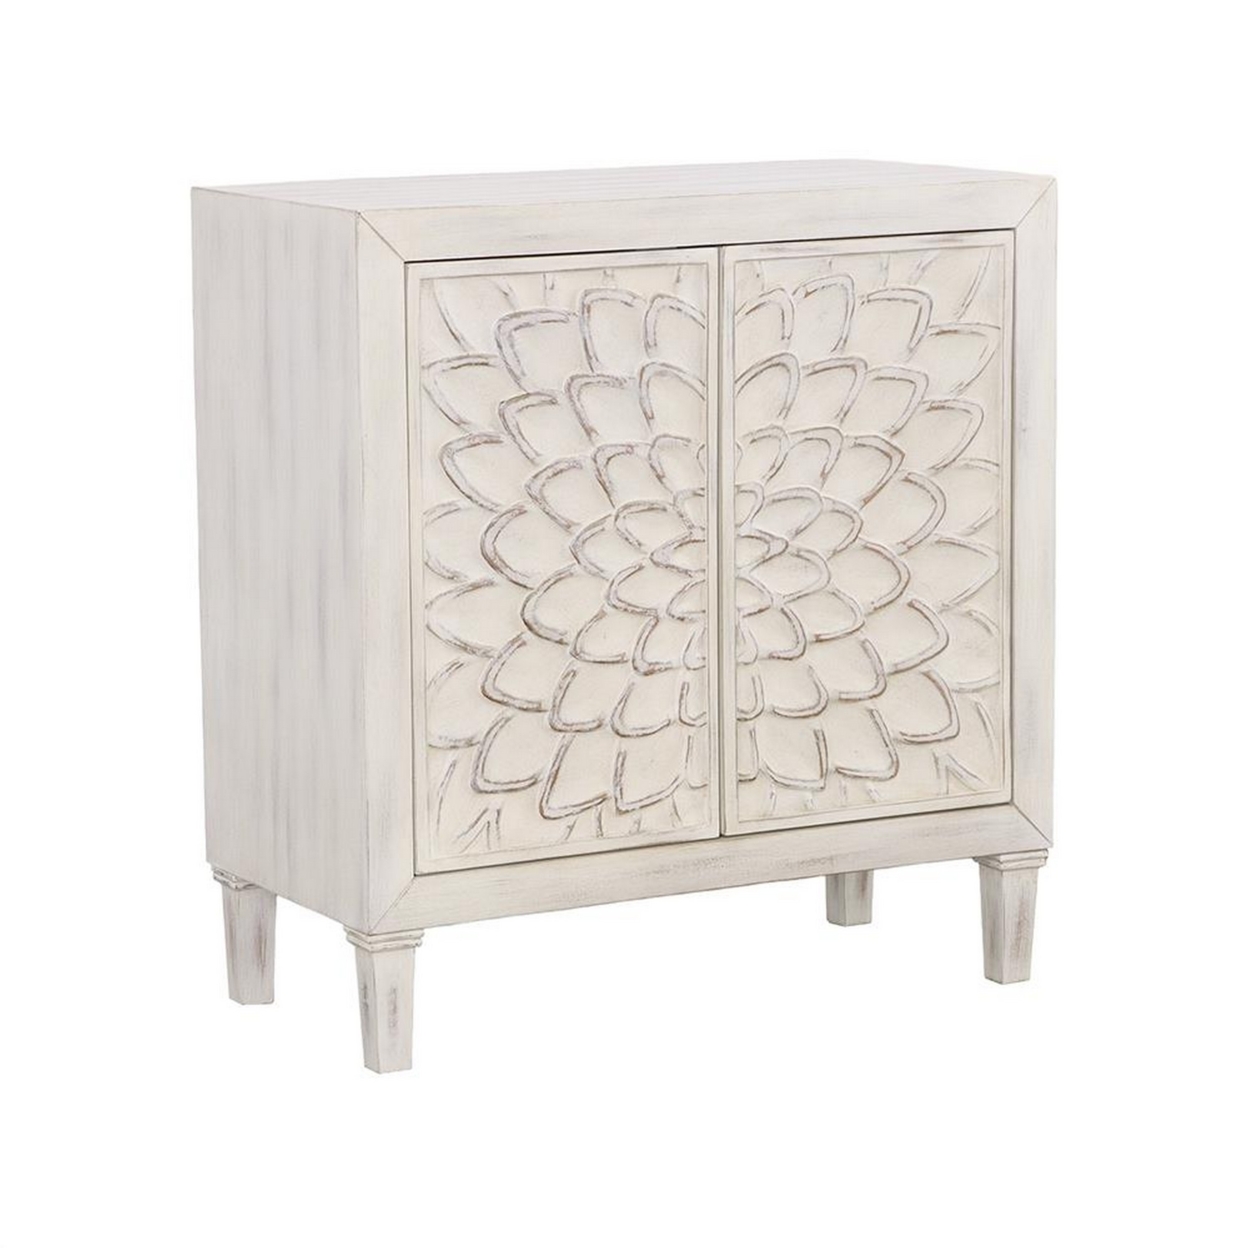 2 Door Wooden Accent Cabinet With Floral Carving, Distressed Whitewash- Saltoro Sherpi